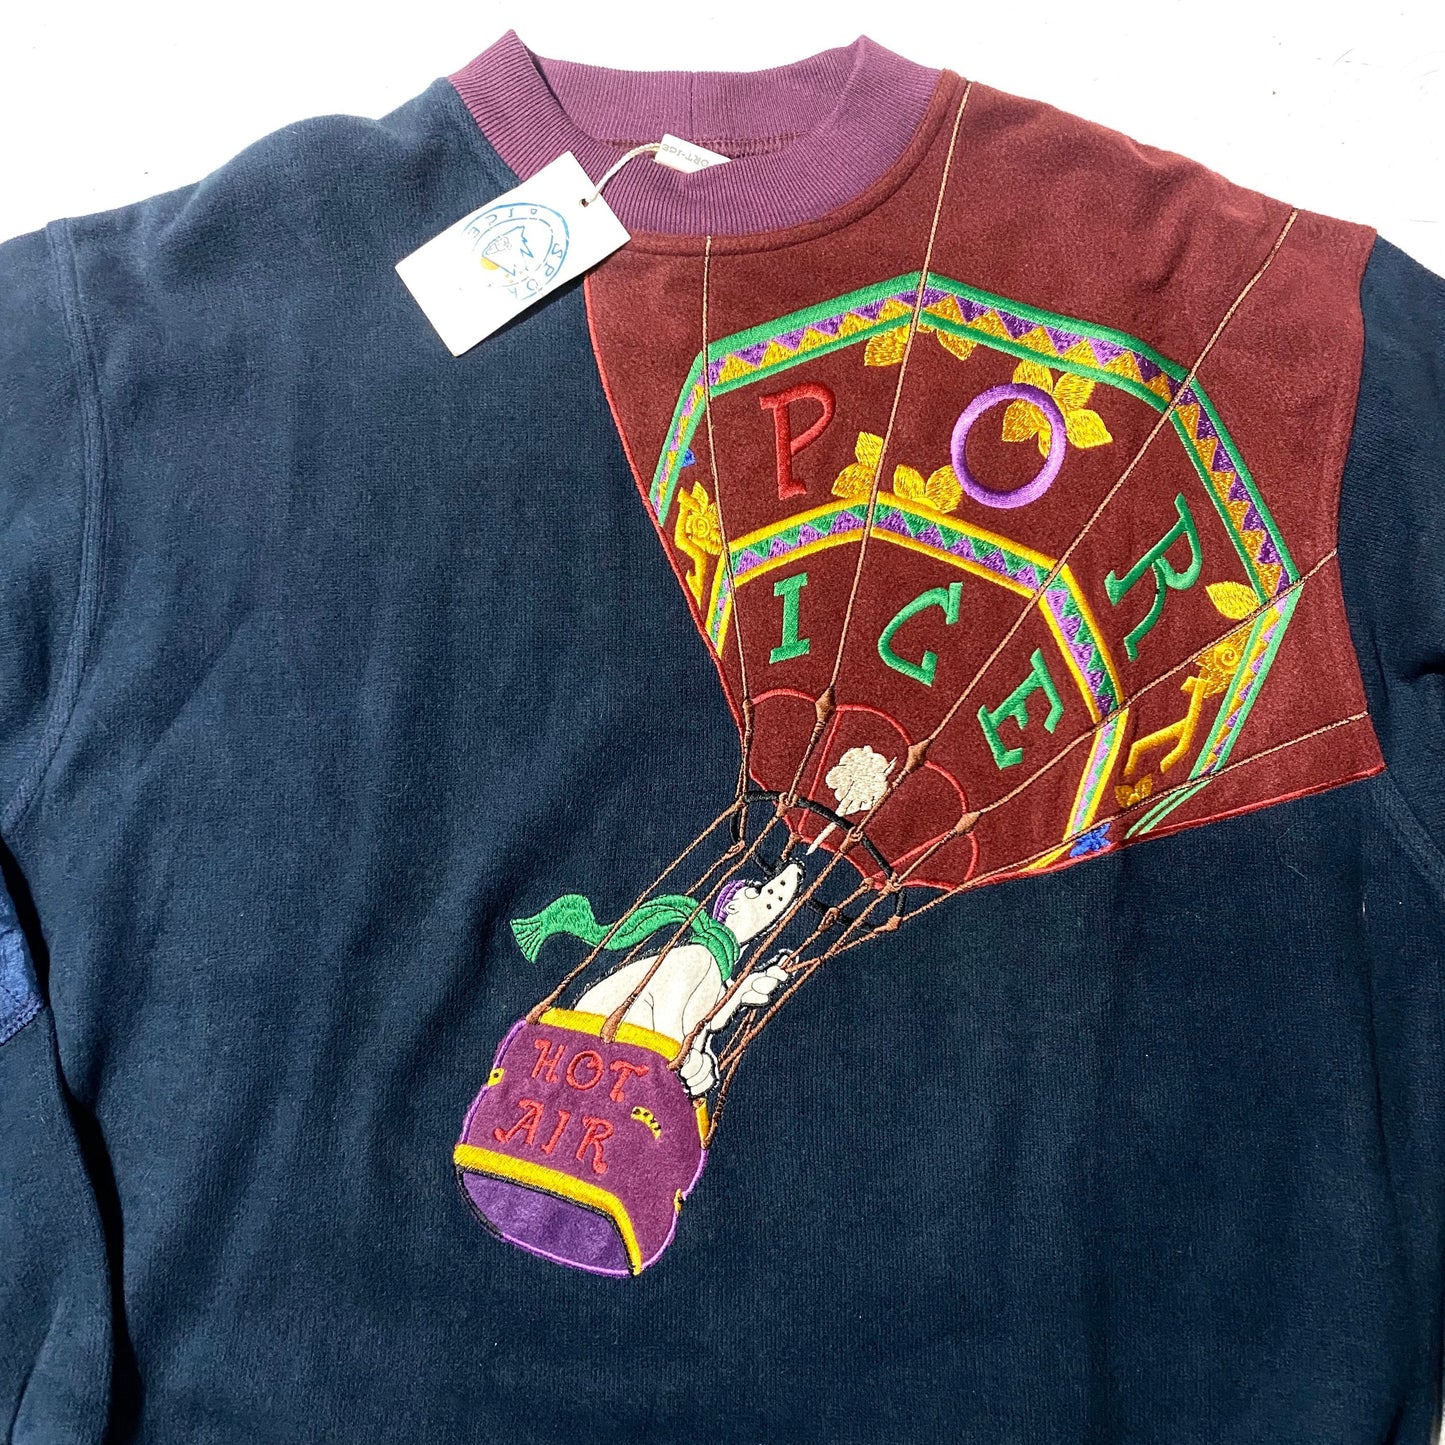 Iceberg sport NWT 90s warm sweatshirt with bear on a hot air balloon embroidered and silk patches, new old stock